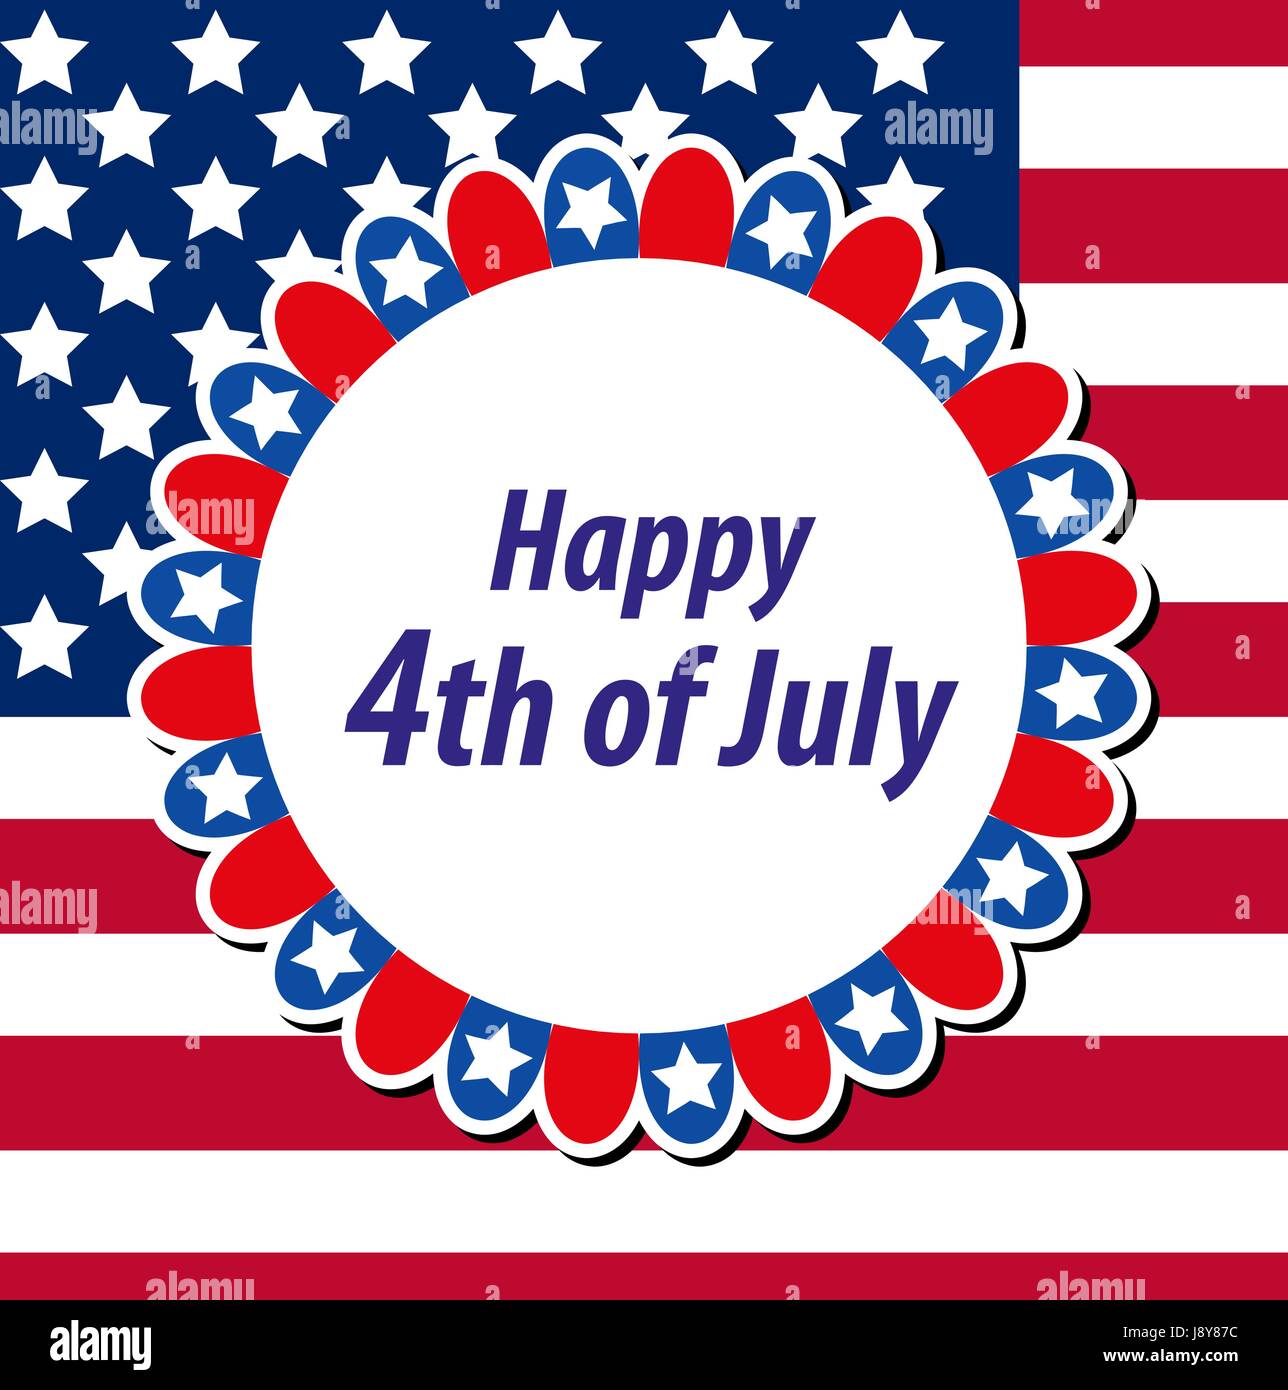 Closed 4Th Of July Template from c8.alamy.com